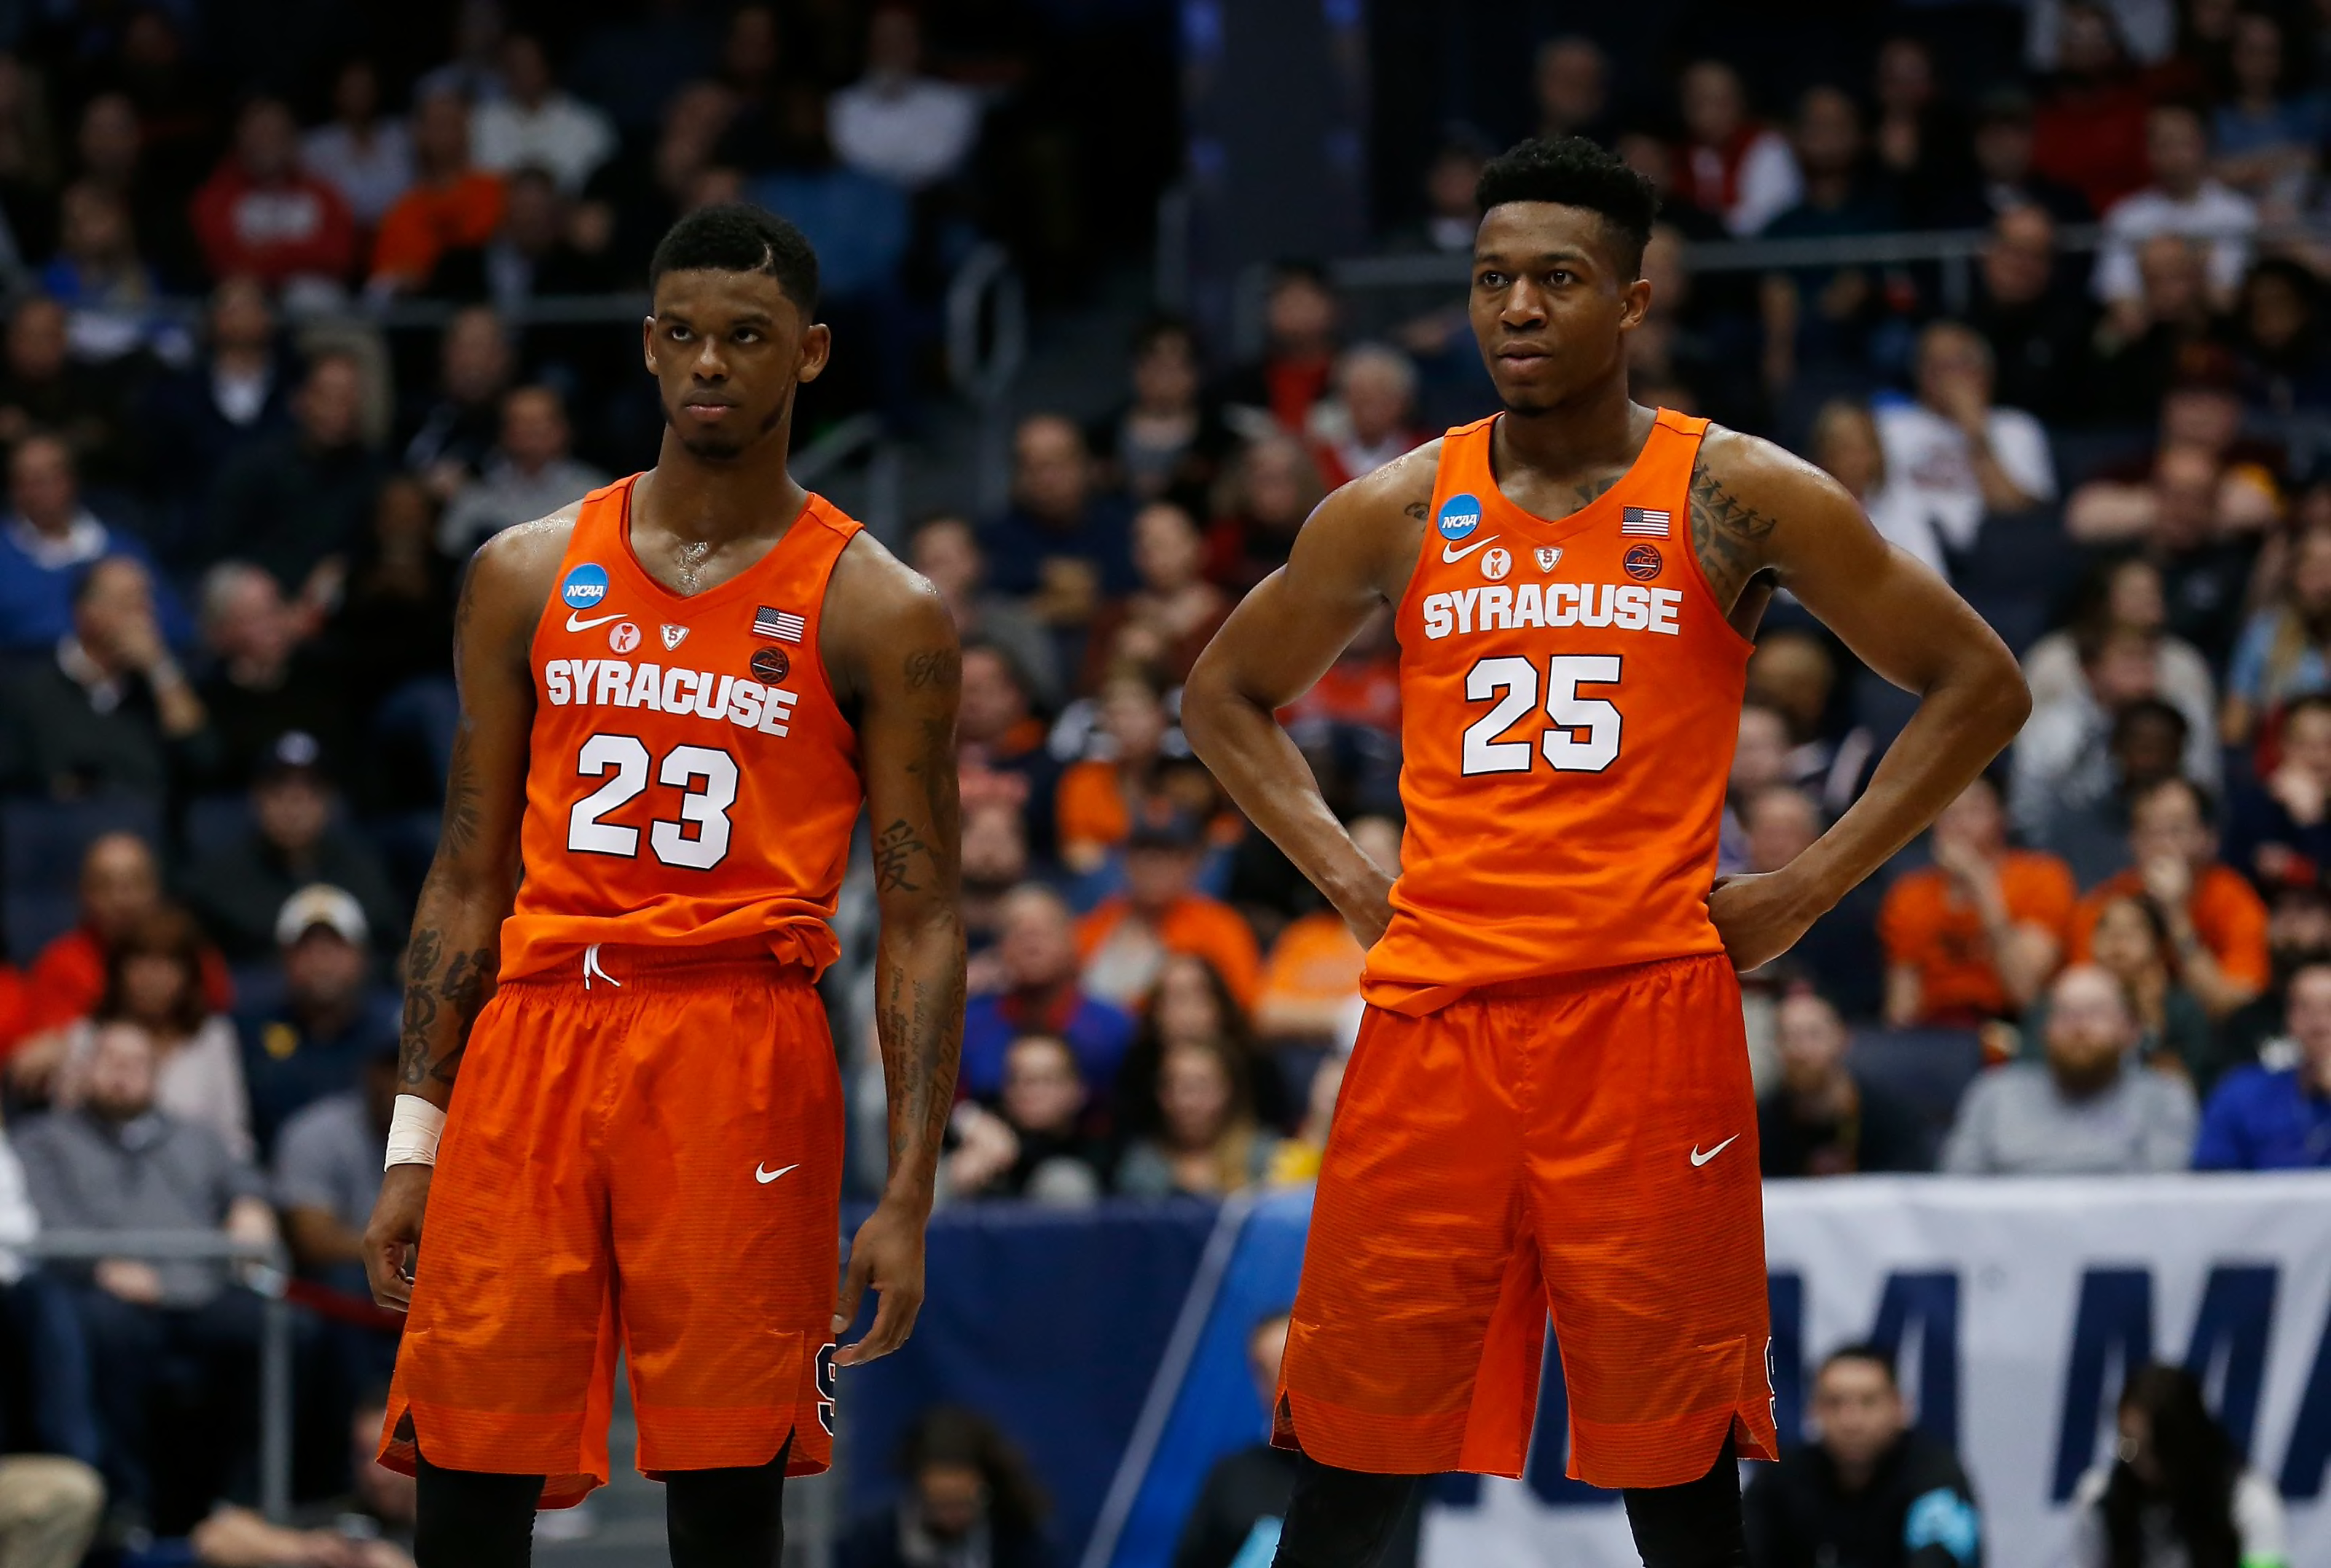 Syracuse Basketball: Why will the Orange be dangerous in 2018-19? - Page 2